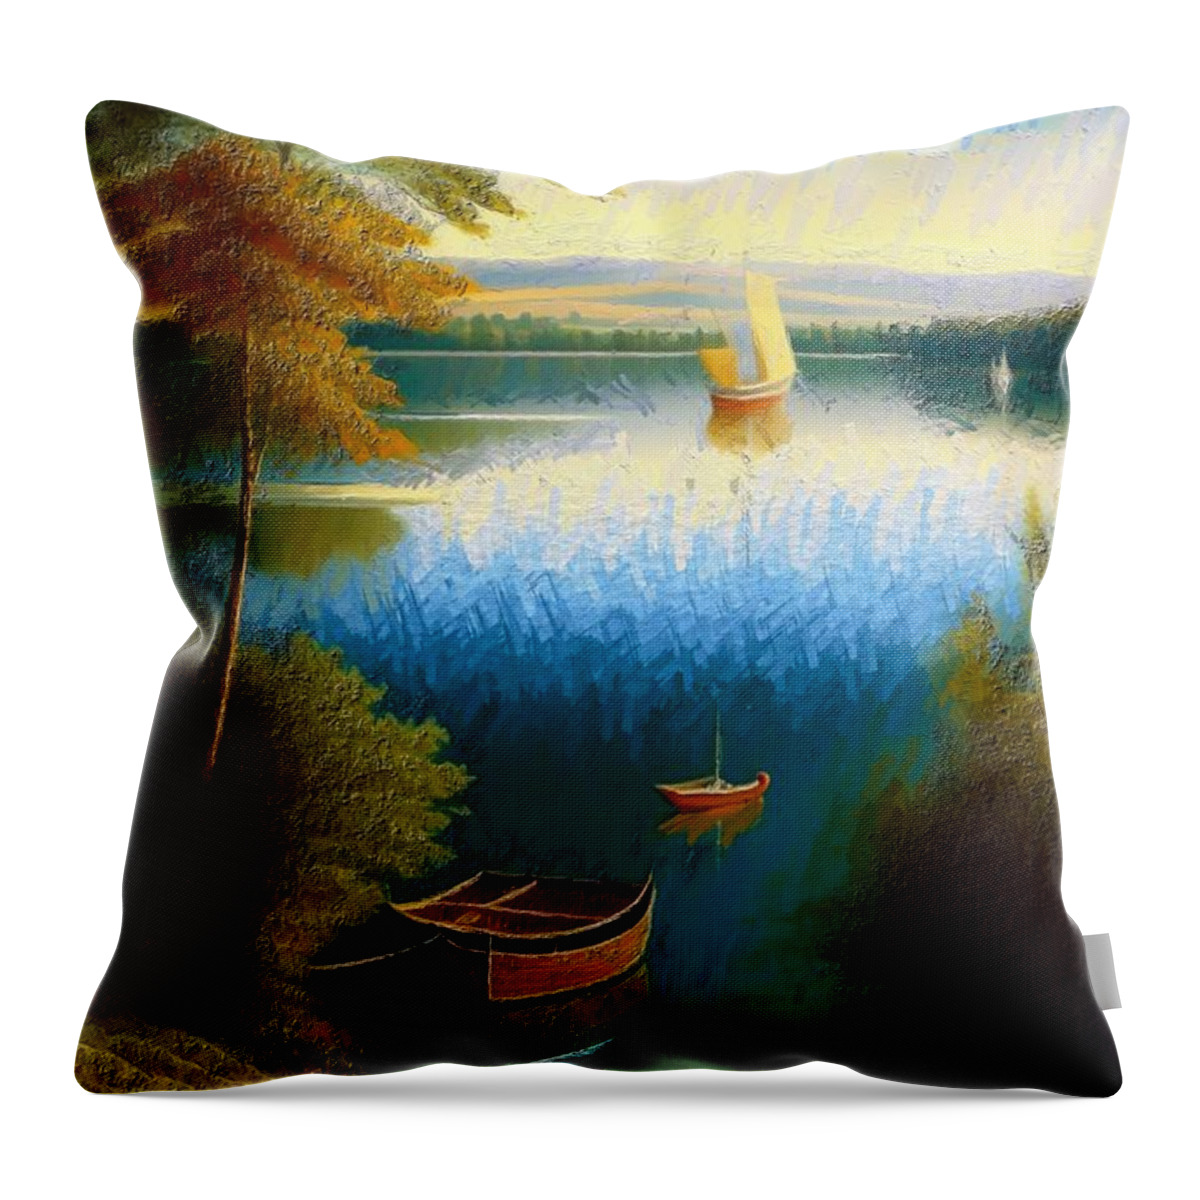 Nature Throw Pillow featuring the mixed media Seragul Lake - Trabzon by Anas Afash